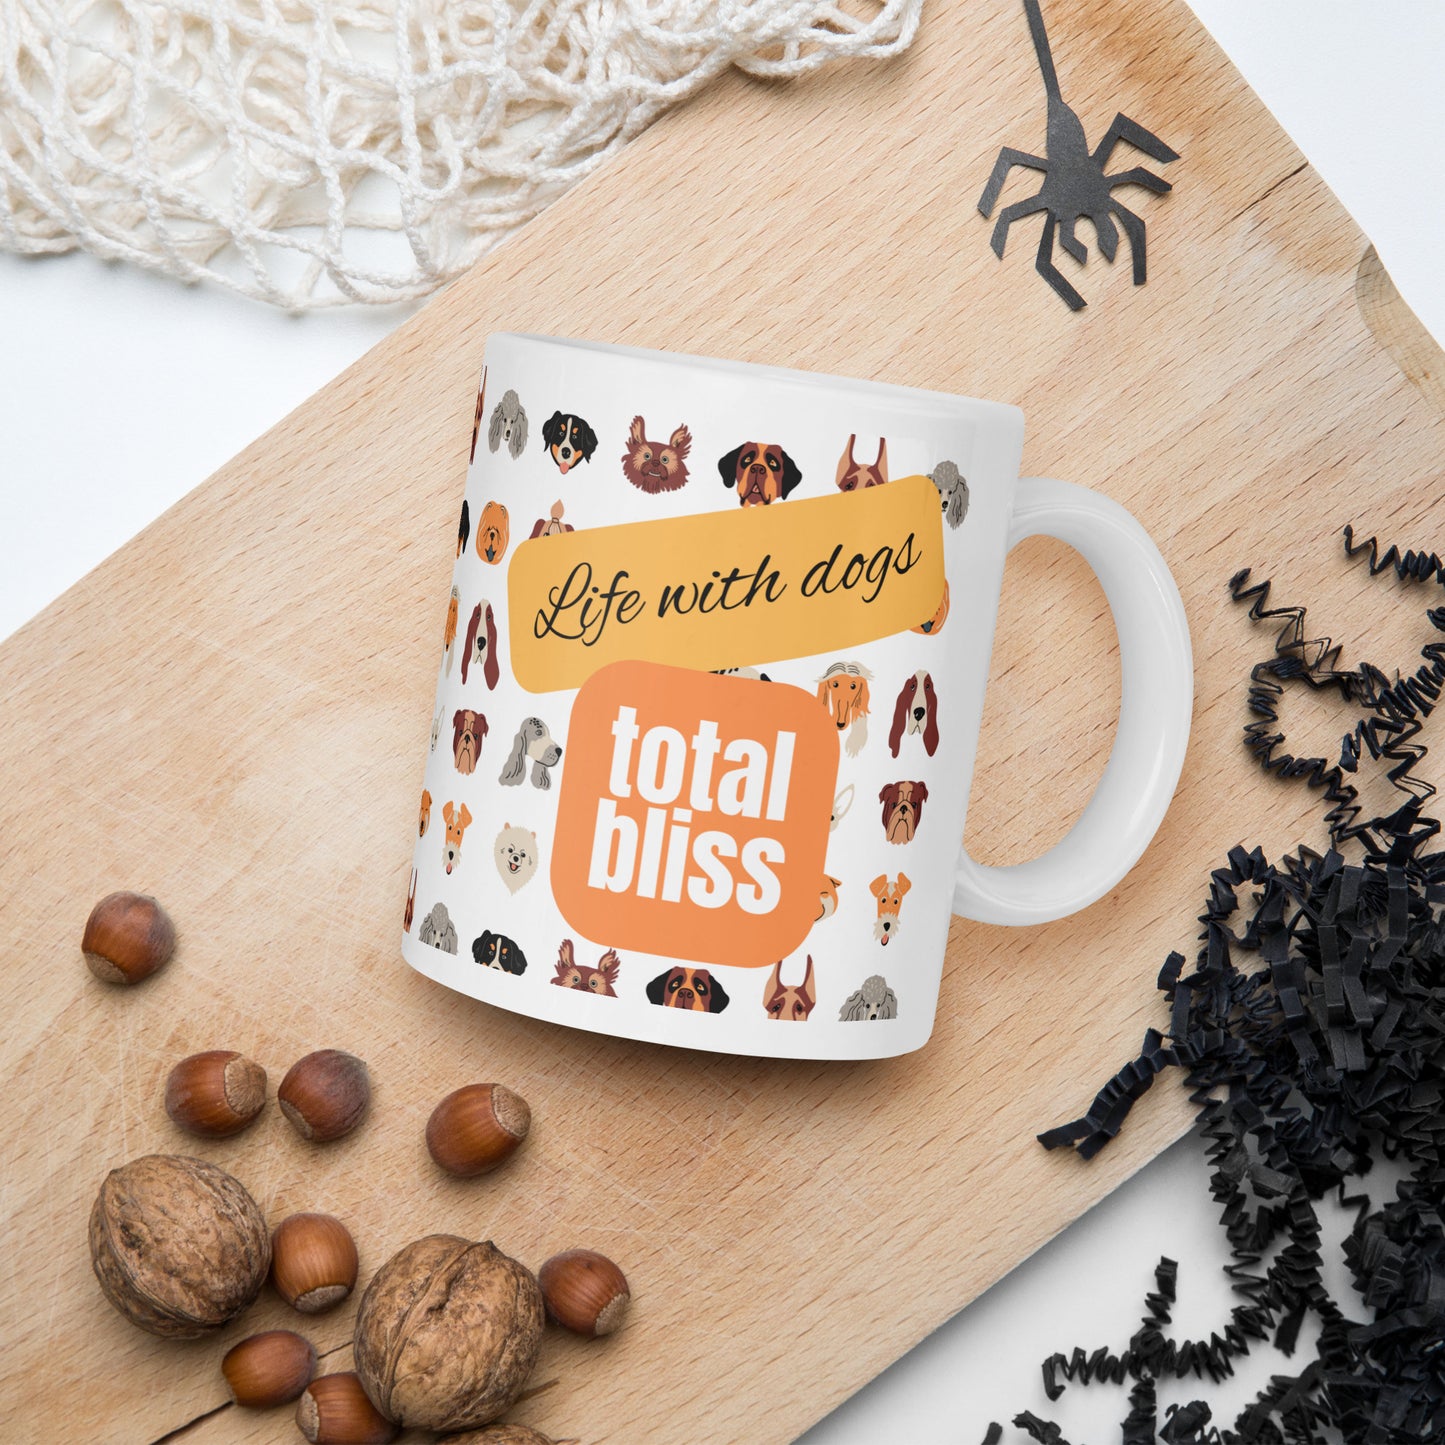 Life With Dogs - Total Bliss - Dog Lovers Mug